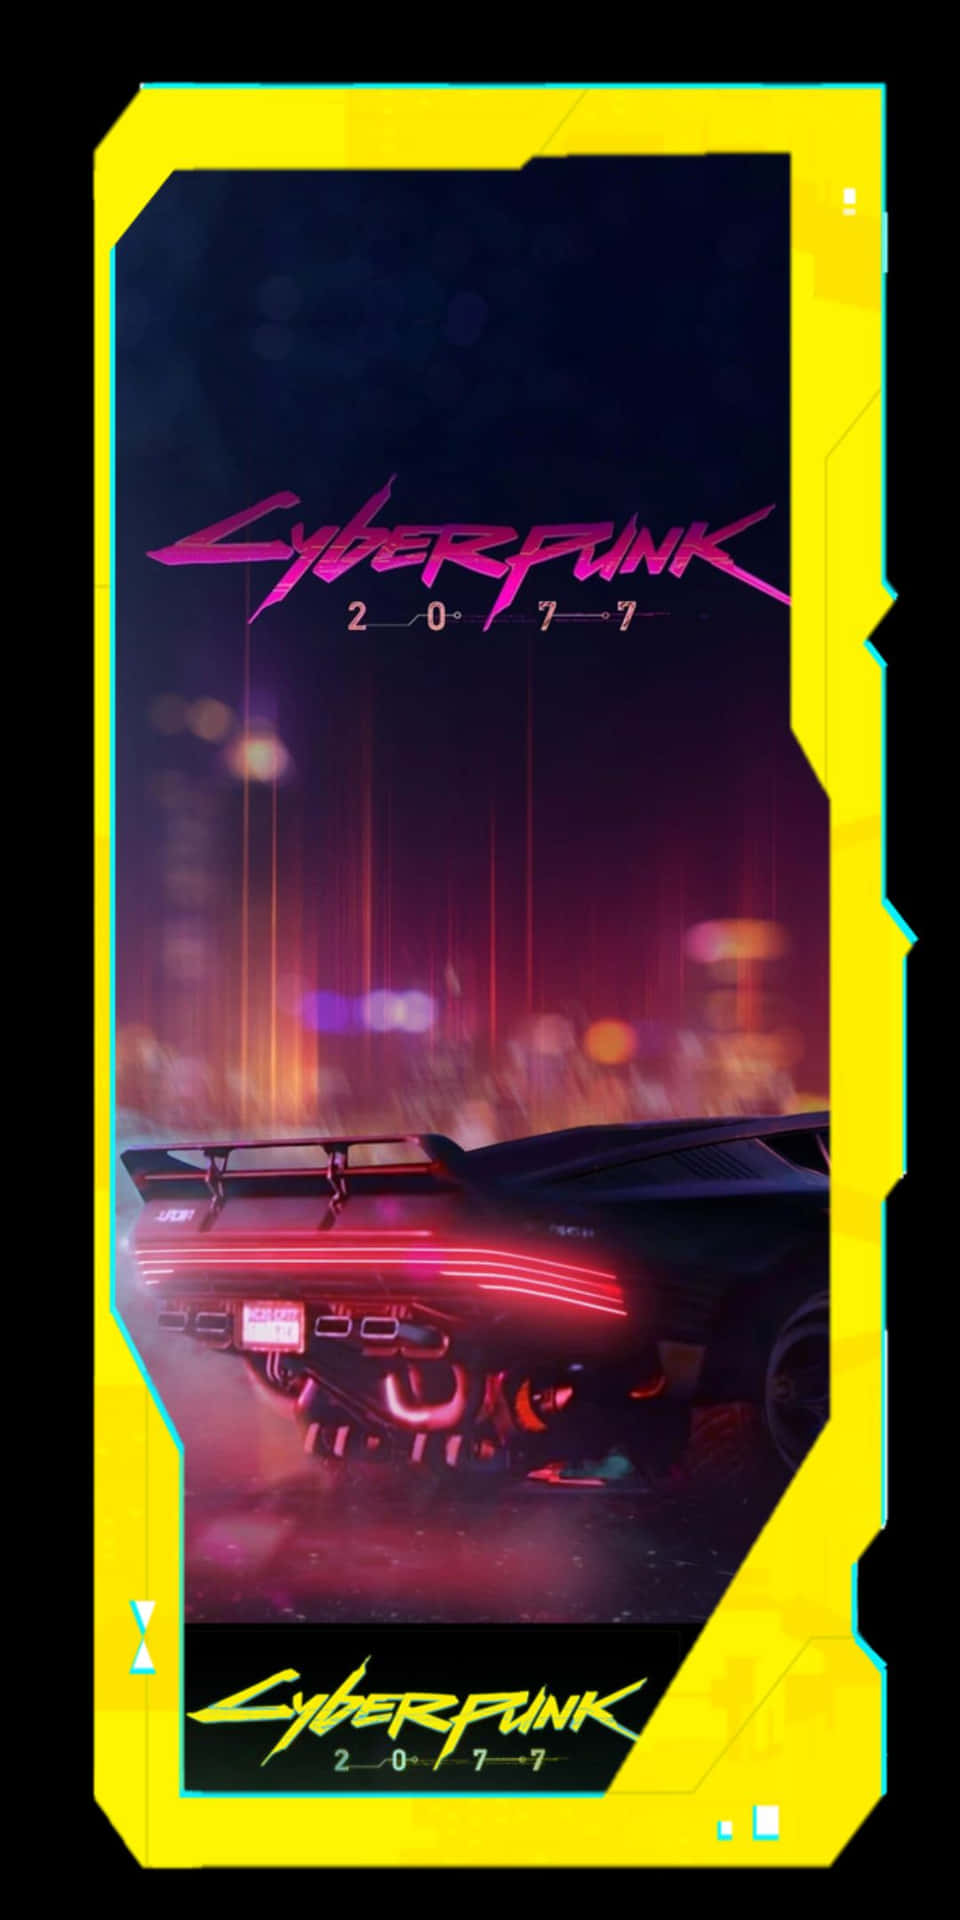 Download Gear up with the all new Pixel 3 Cyberpunk 2077 phone